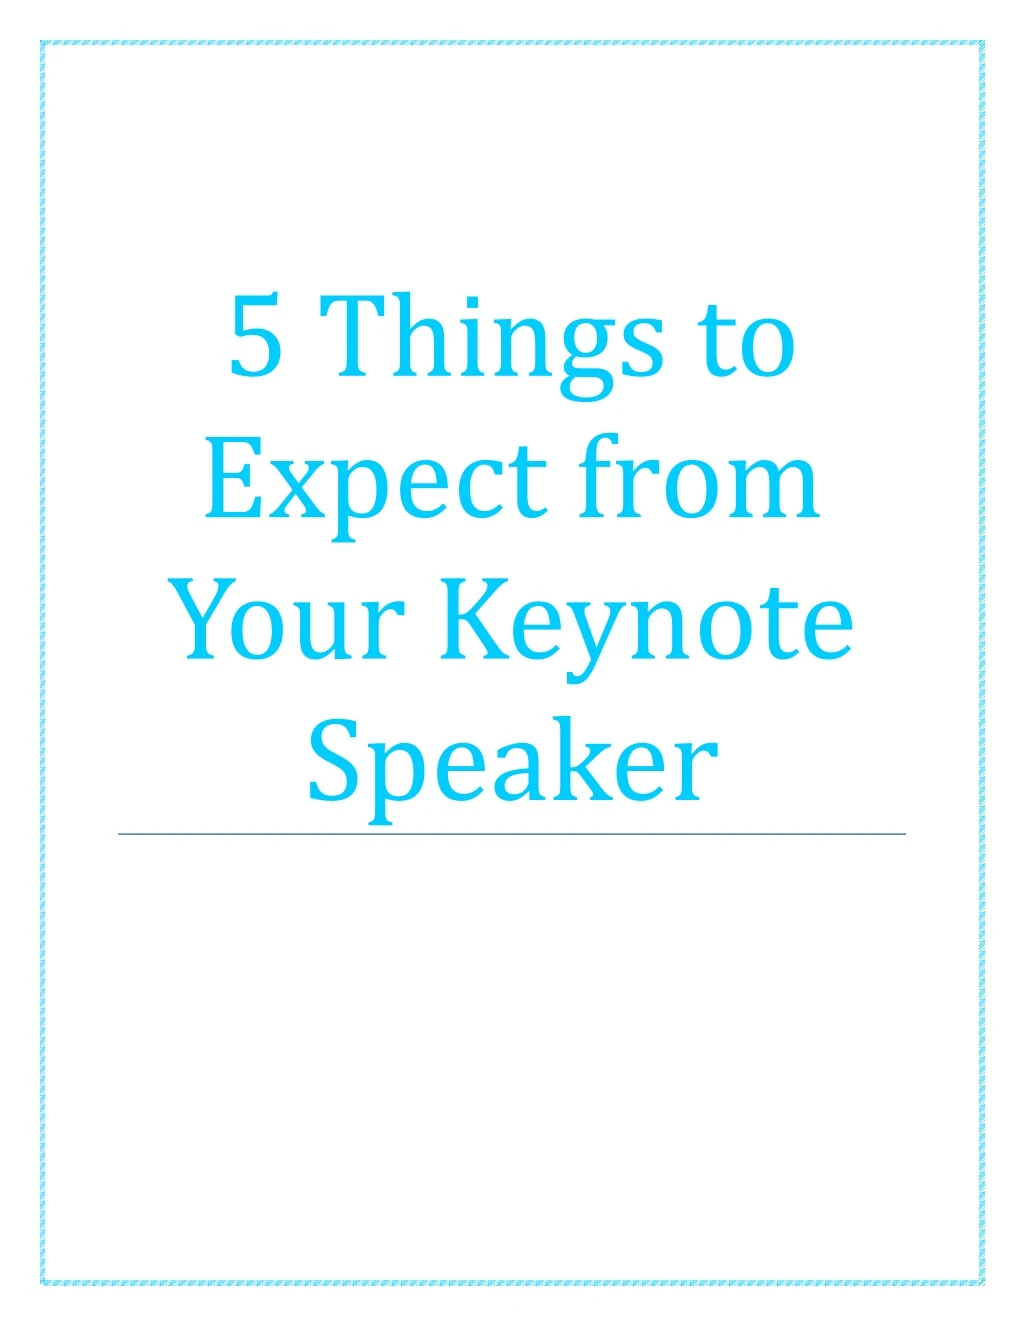 5 things to expect from your keynote speaker